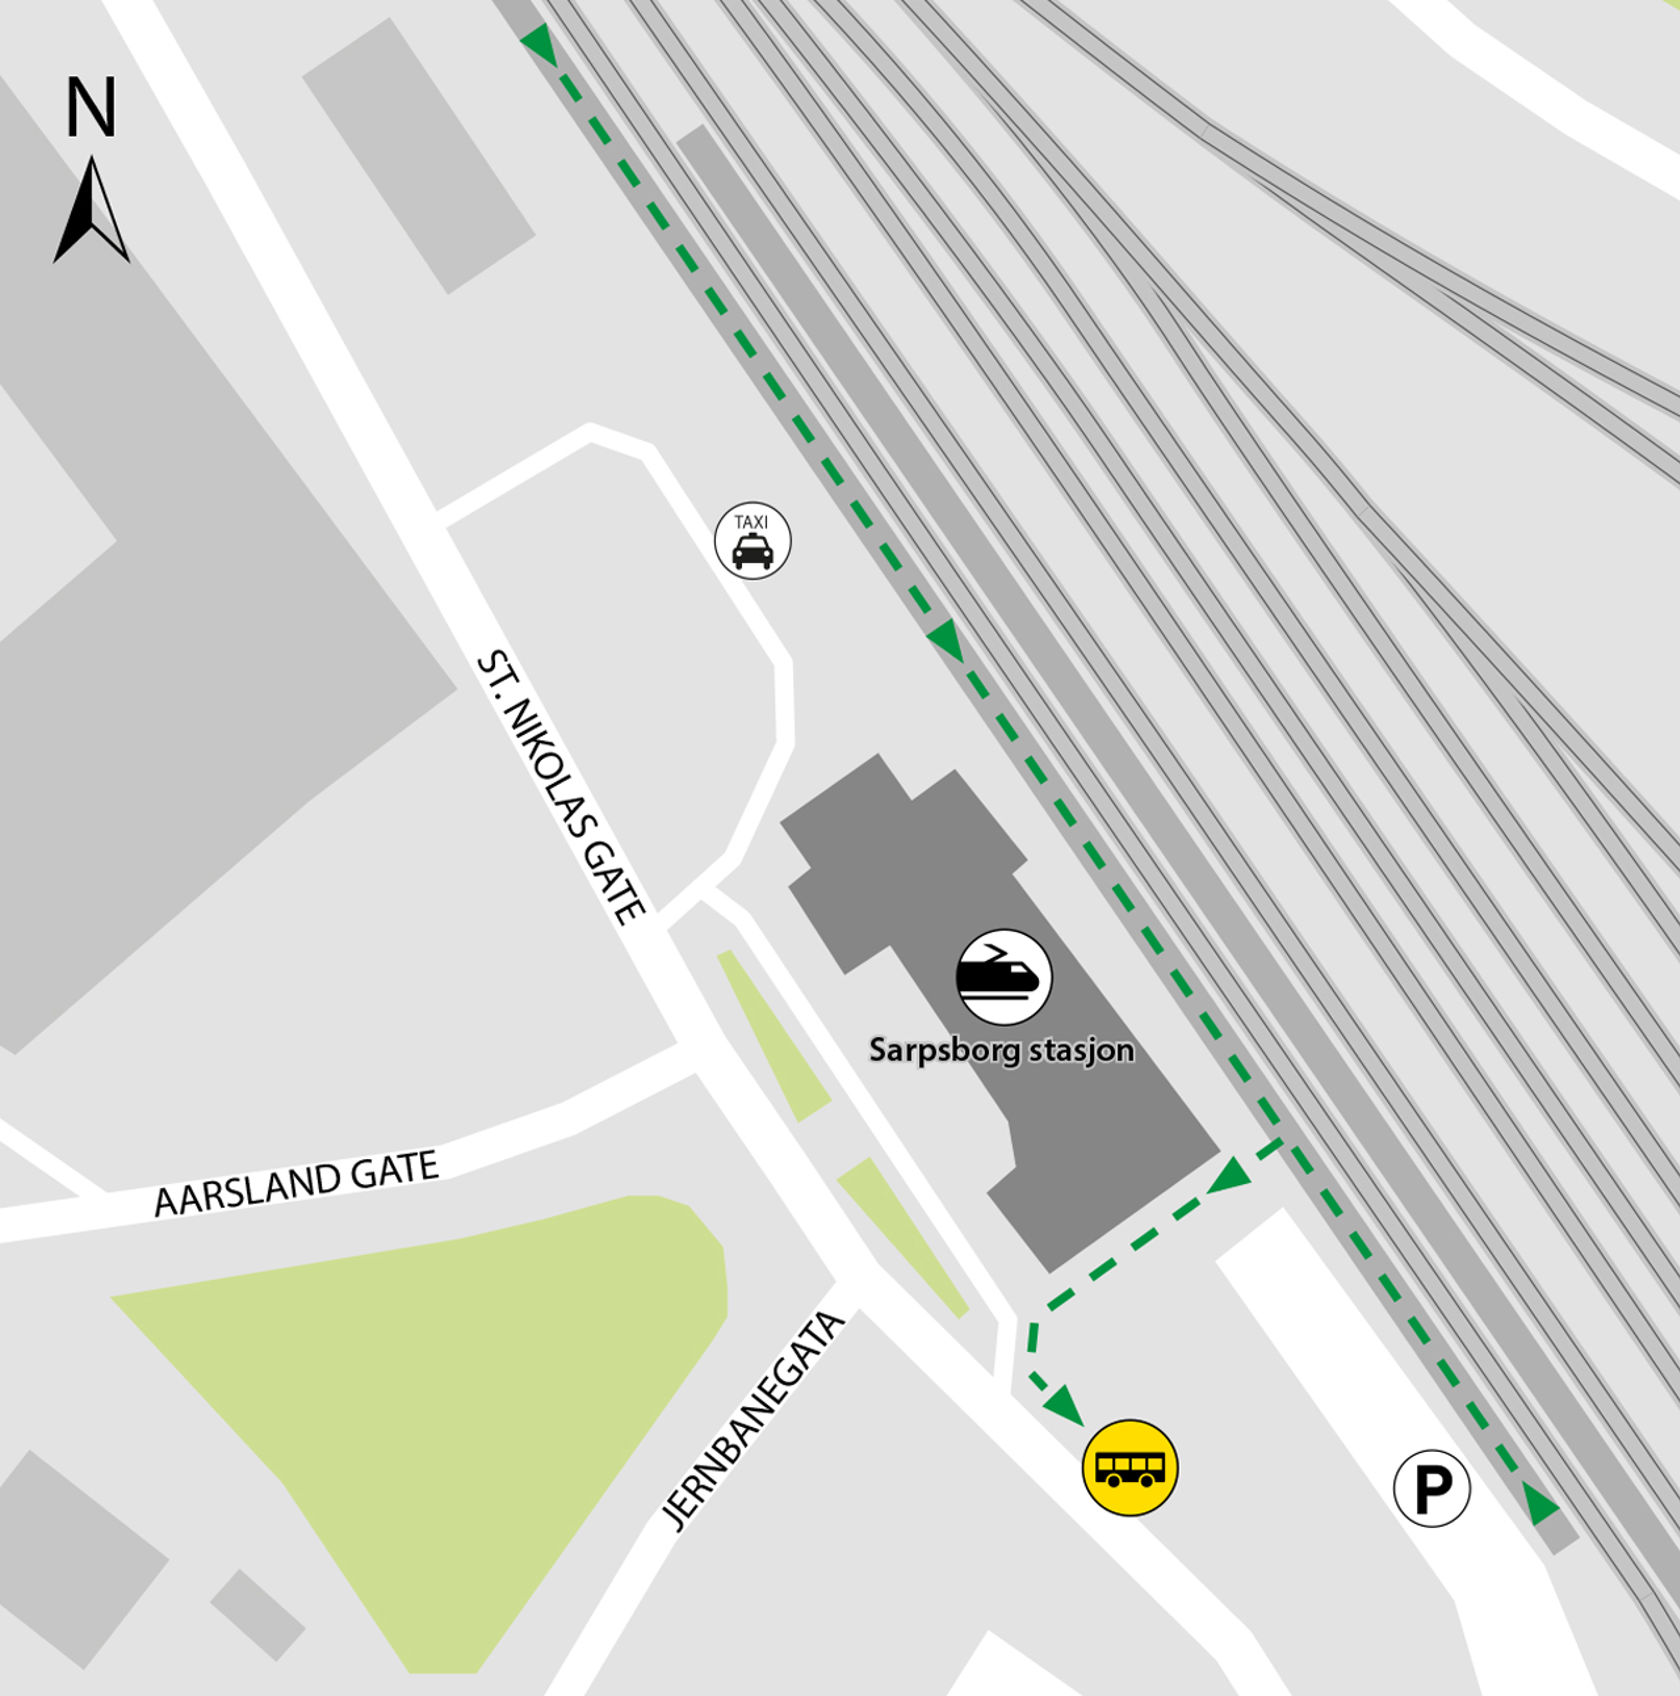 Map shows rail replacement service departs from bus stop Sarpsborg station.